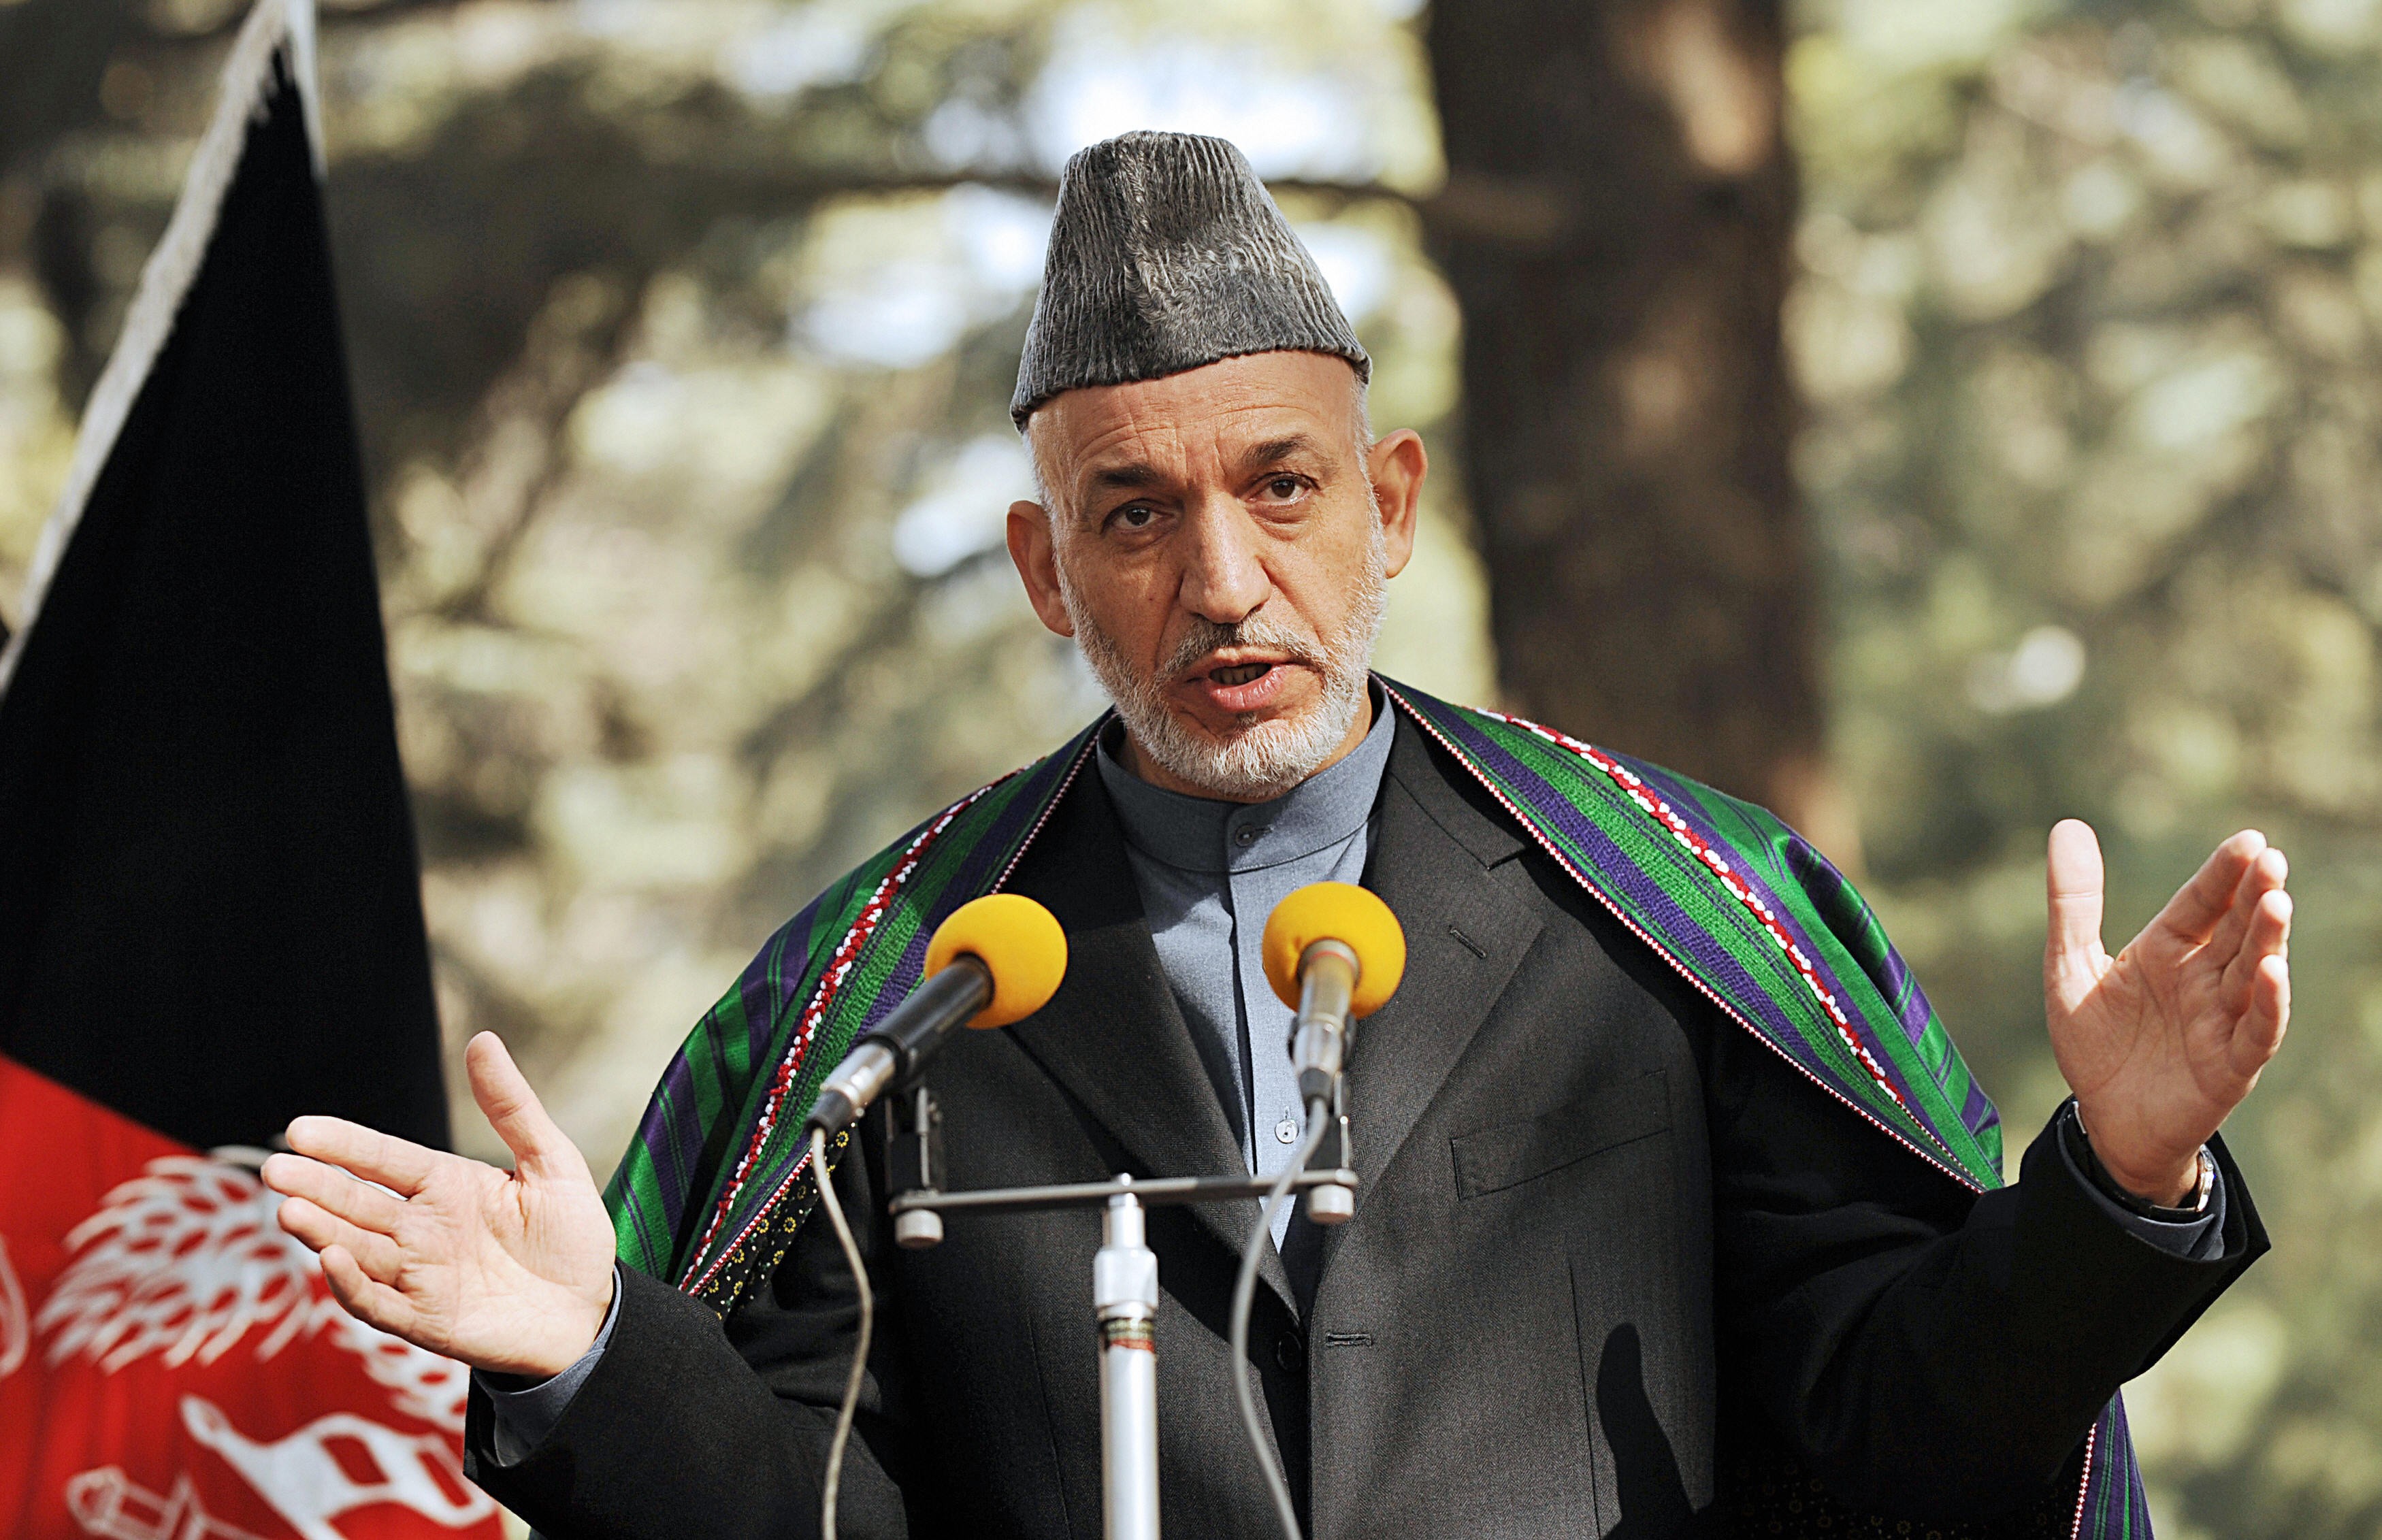 Afghan President Hamid Karzai addresses media representatives during a press conference at the Presidential palace in Kabul on November 5, 2008. Karzai congratulated Barack Obama on his US election victory, saying it took the world into a 